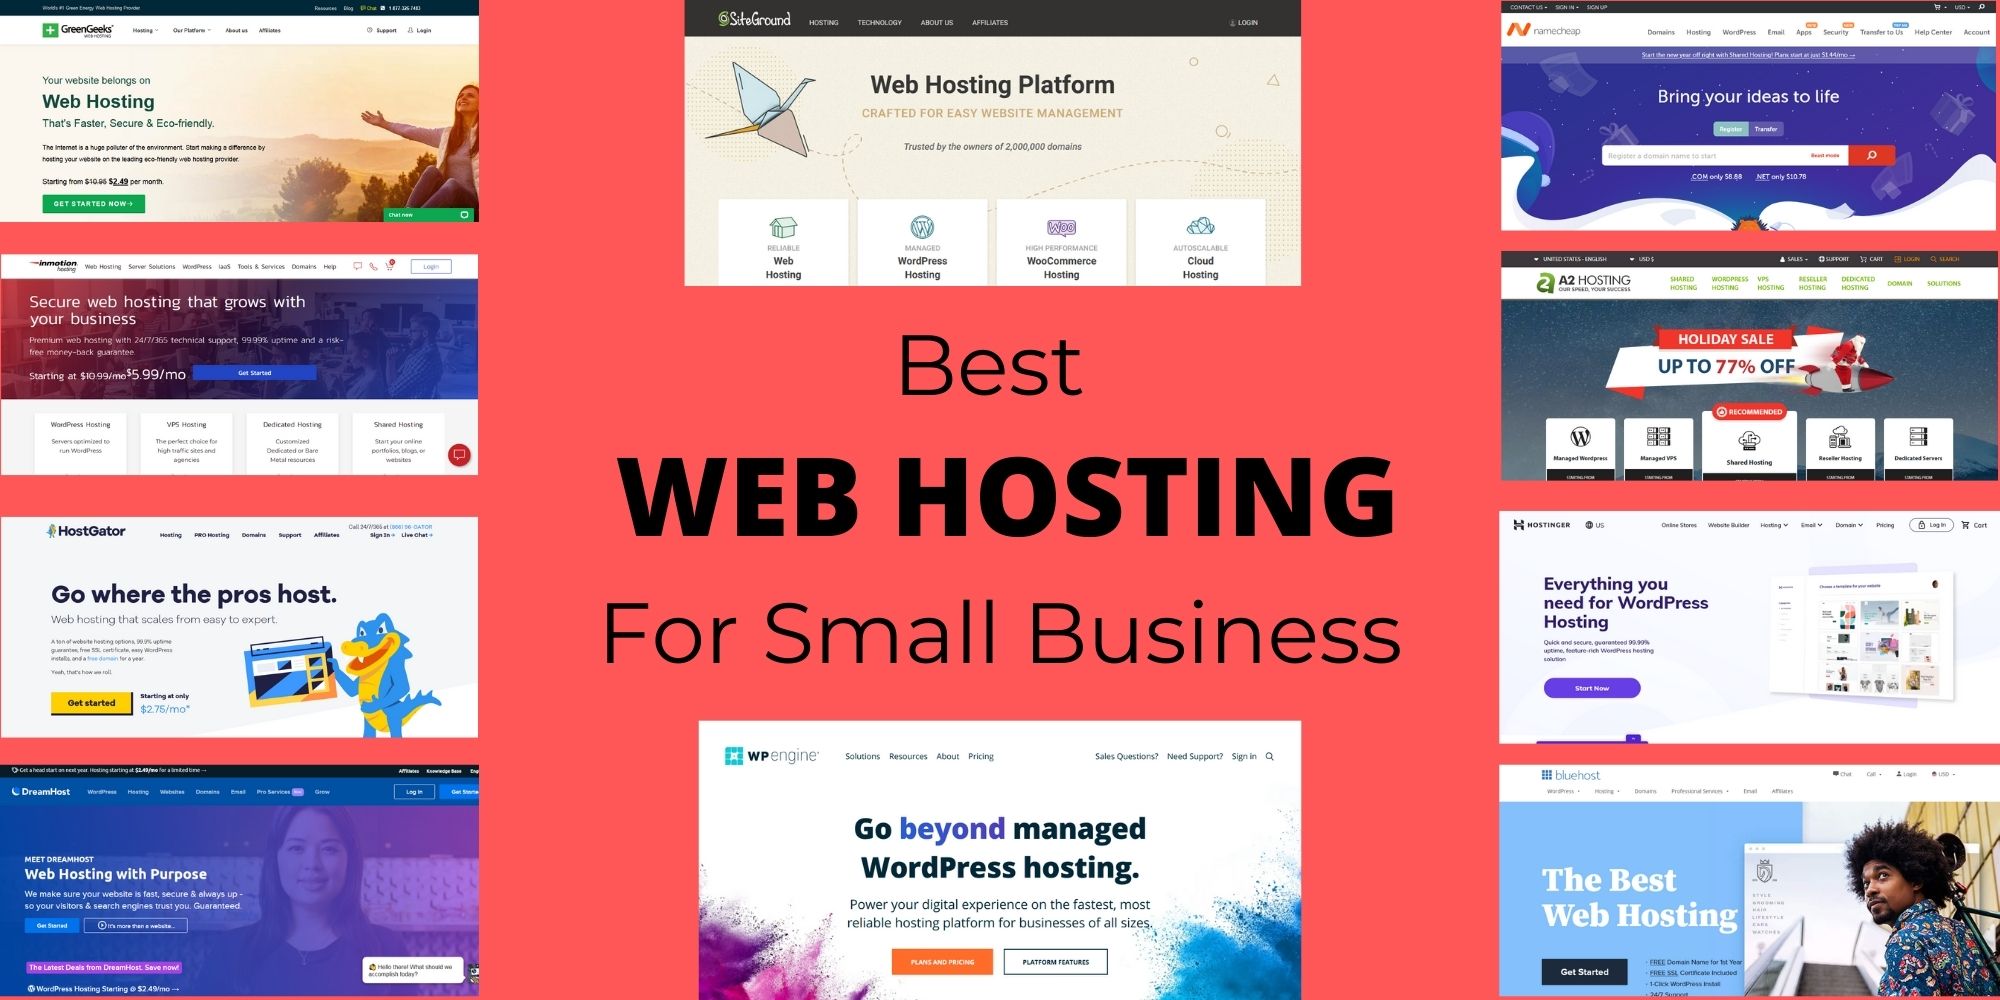 best web hositng for small business